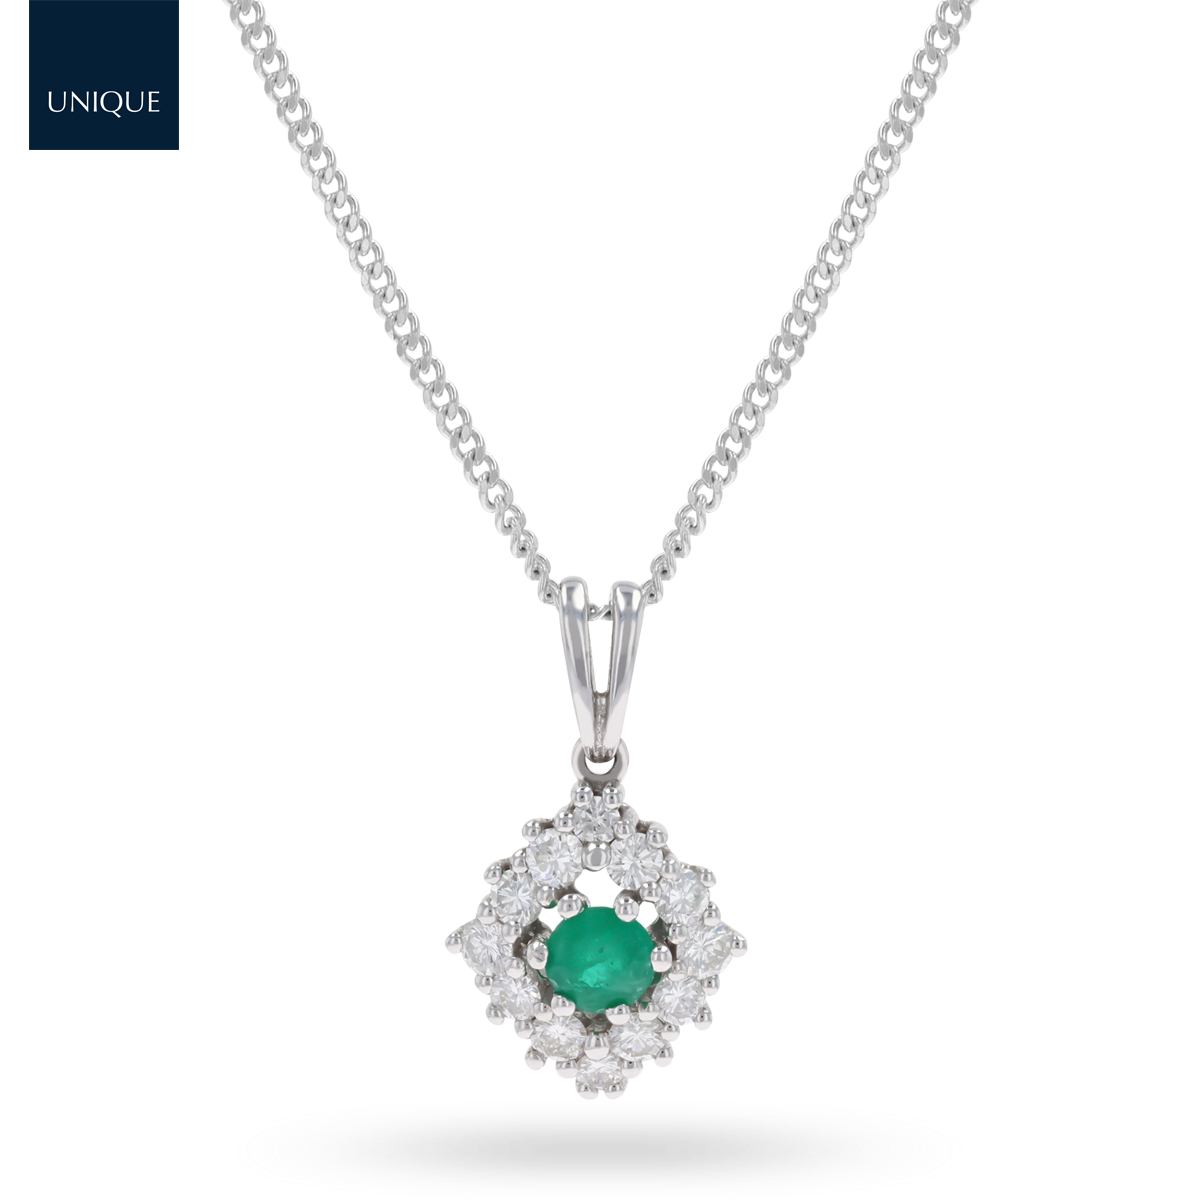 18ct White Gold Emerald & Diamond Marquise Cluster Pendant & Chain18ct White Gold Emerald & Diamond Marquise Cluster Pendant & Chain